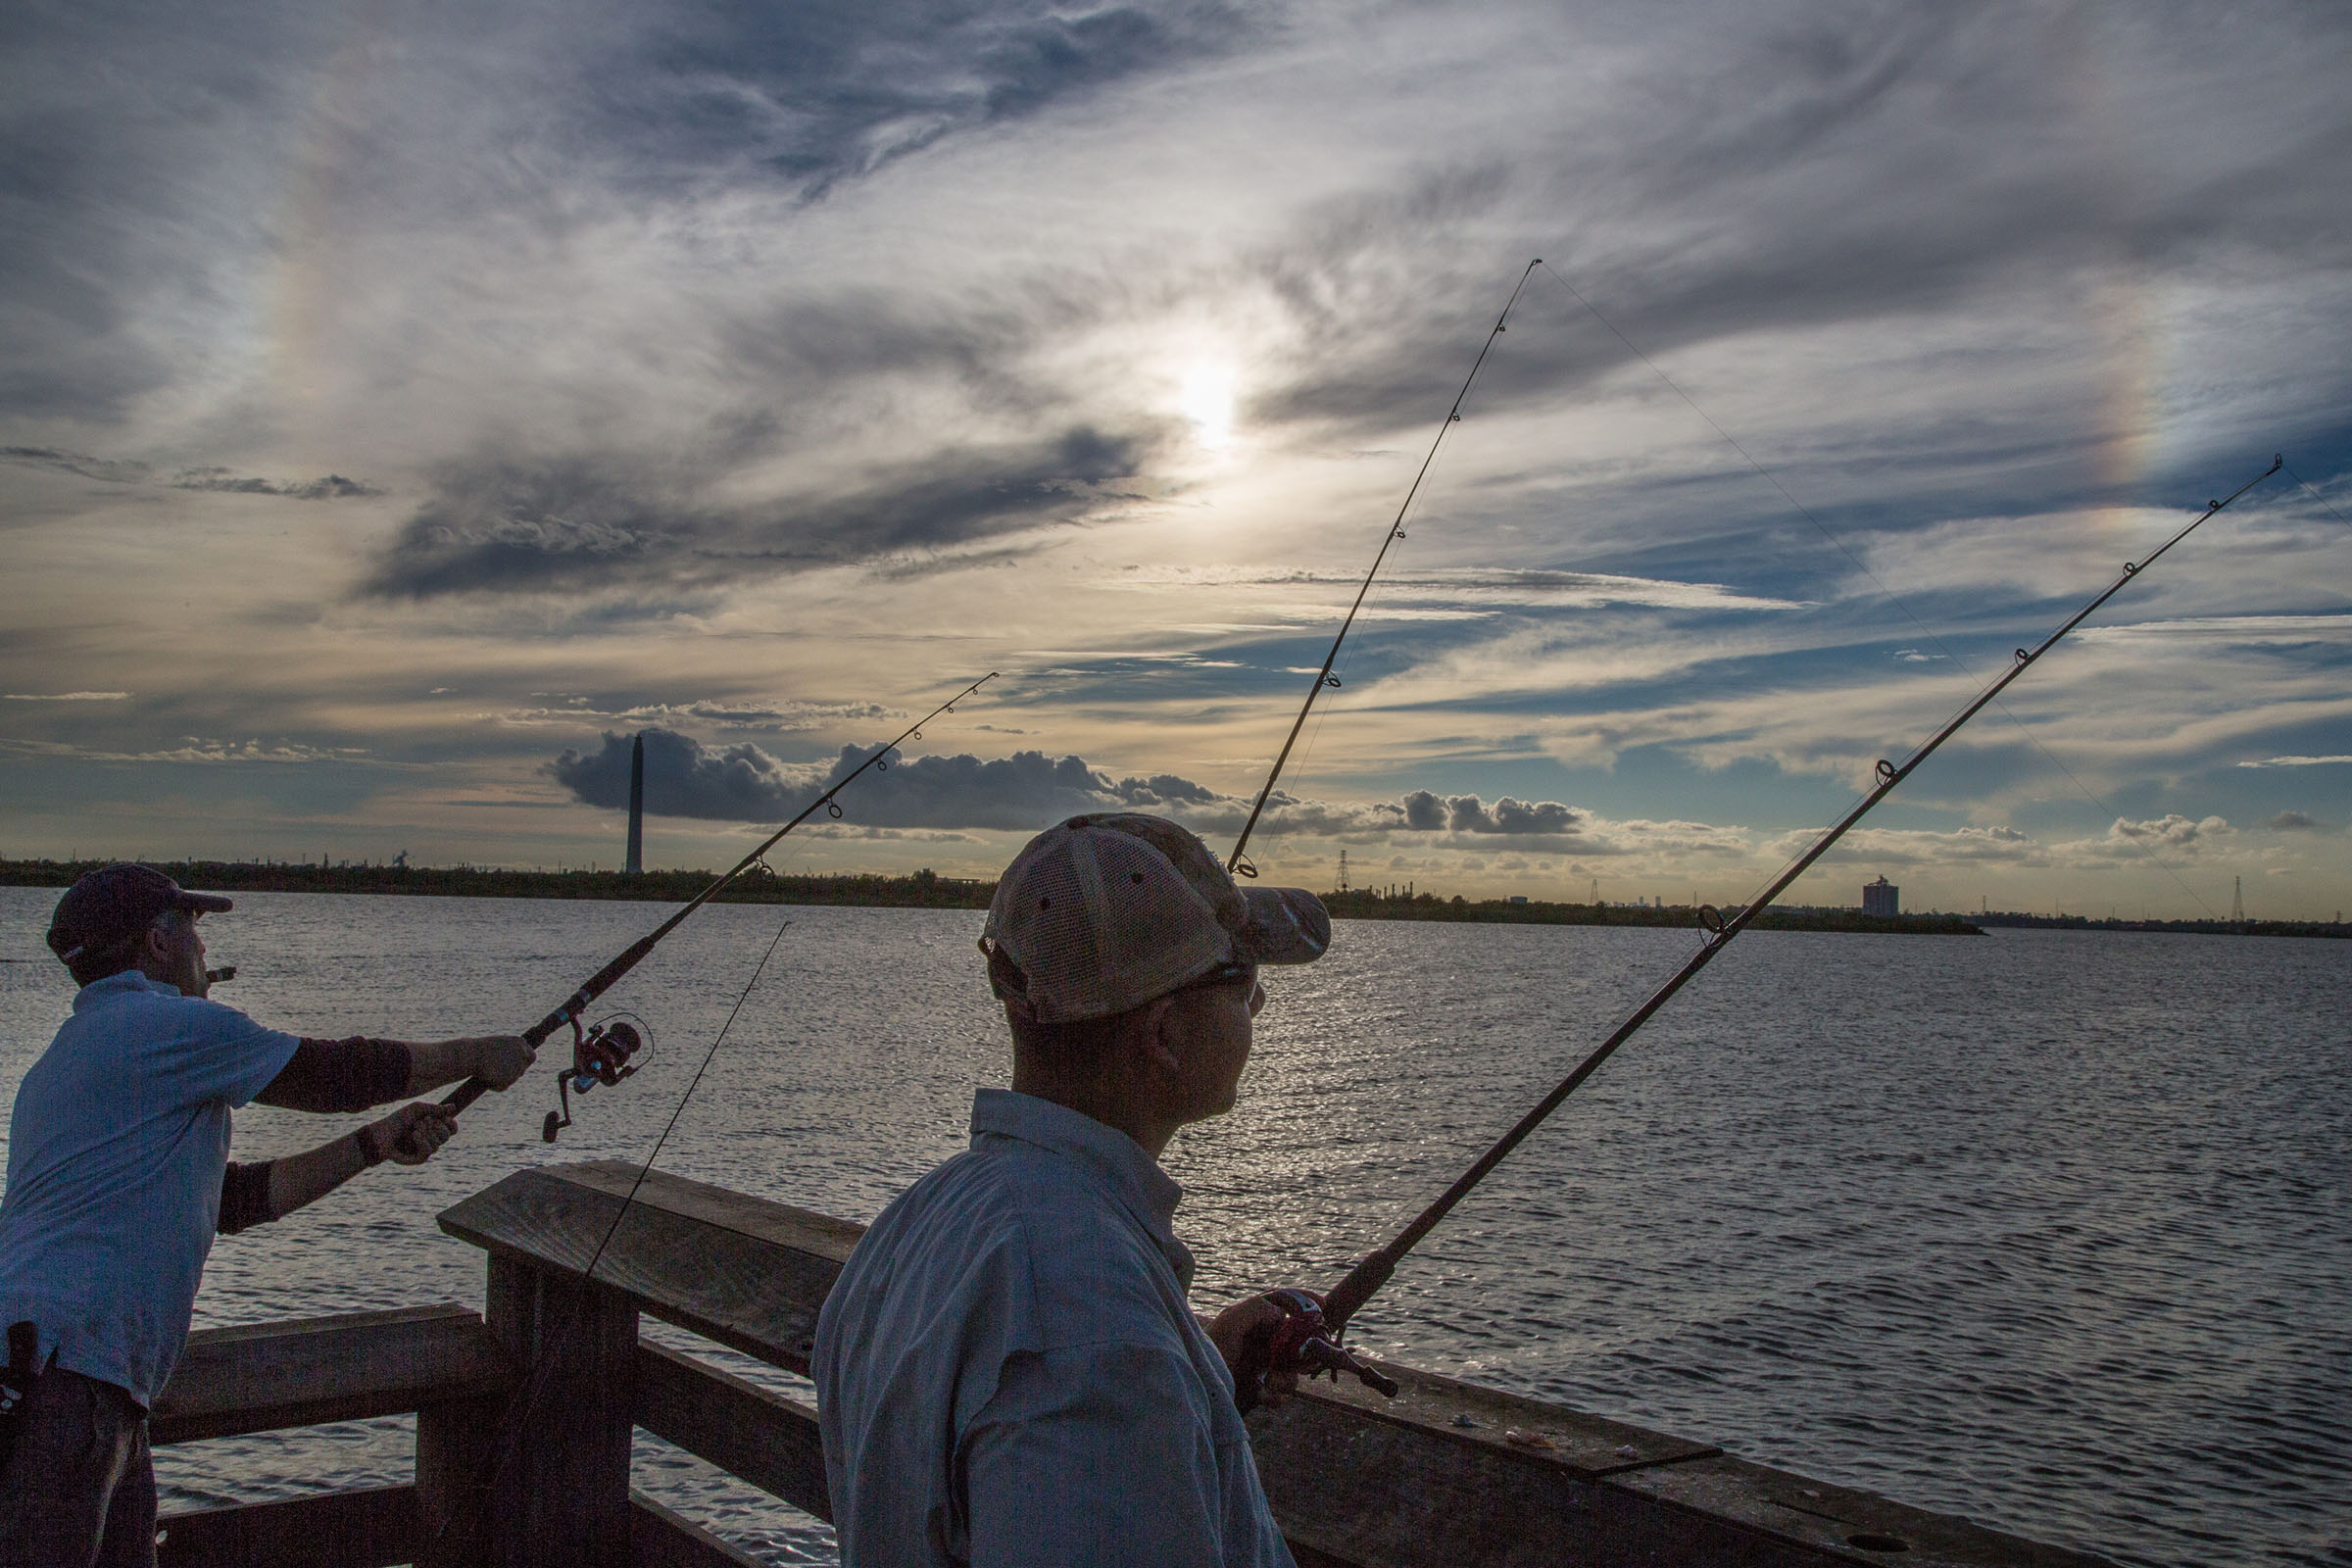 Man fishing off a pier on a sunny, partially cloudy day